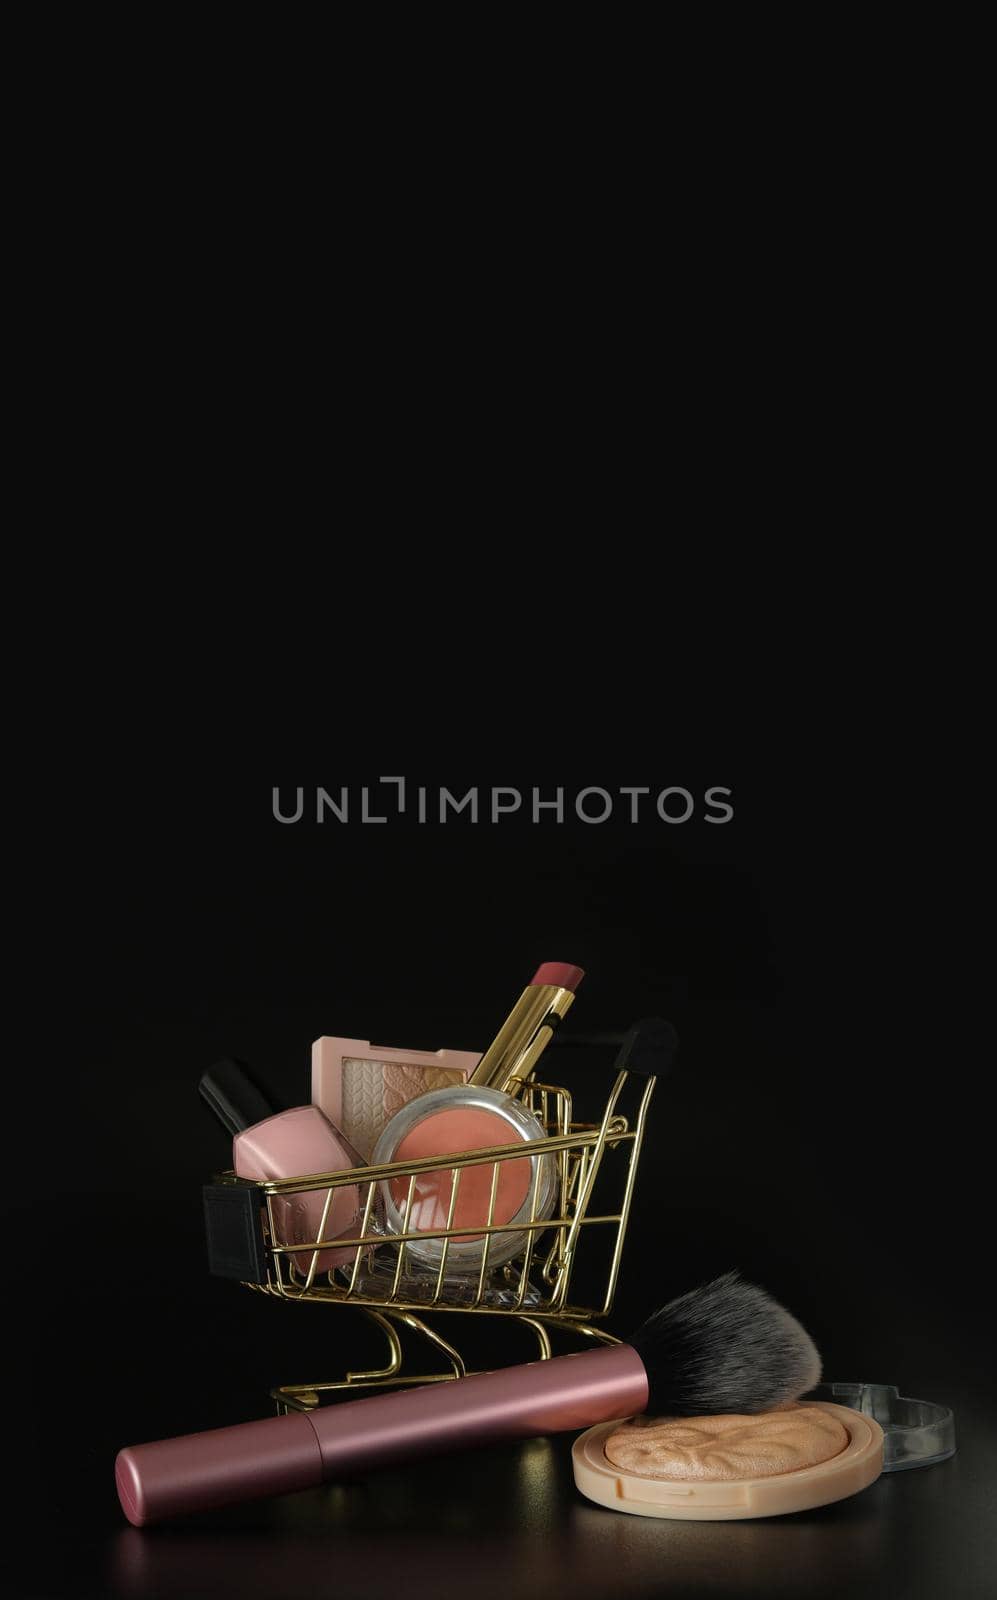 Shopping trolley full of make up and cosmetic goods on black background. Black friday concept. Sale and discount. Goods for women. Closeup of a basket with products for make-up. Beauty background, free space for text, copy space, modern layout, close up.